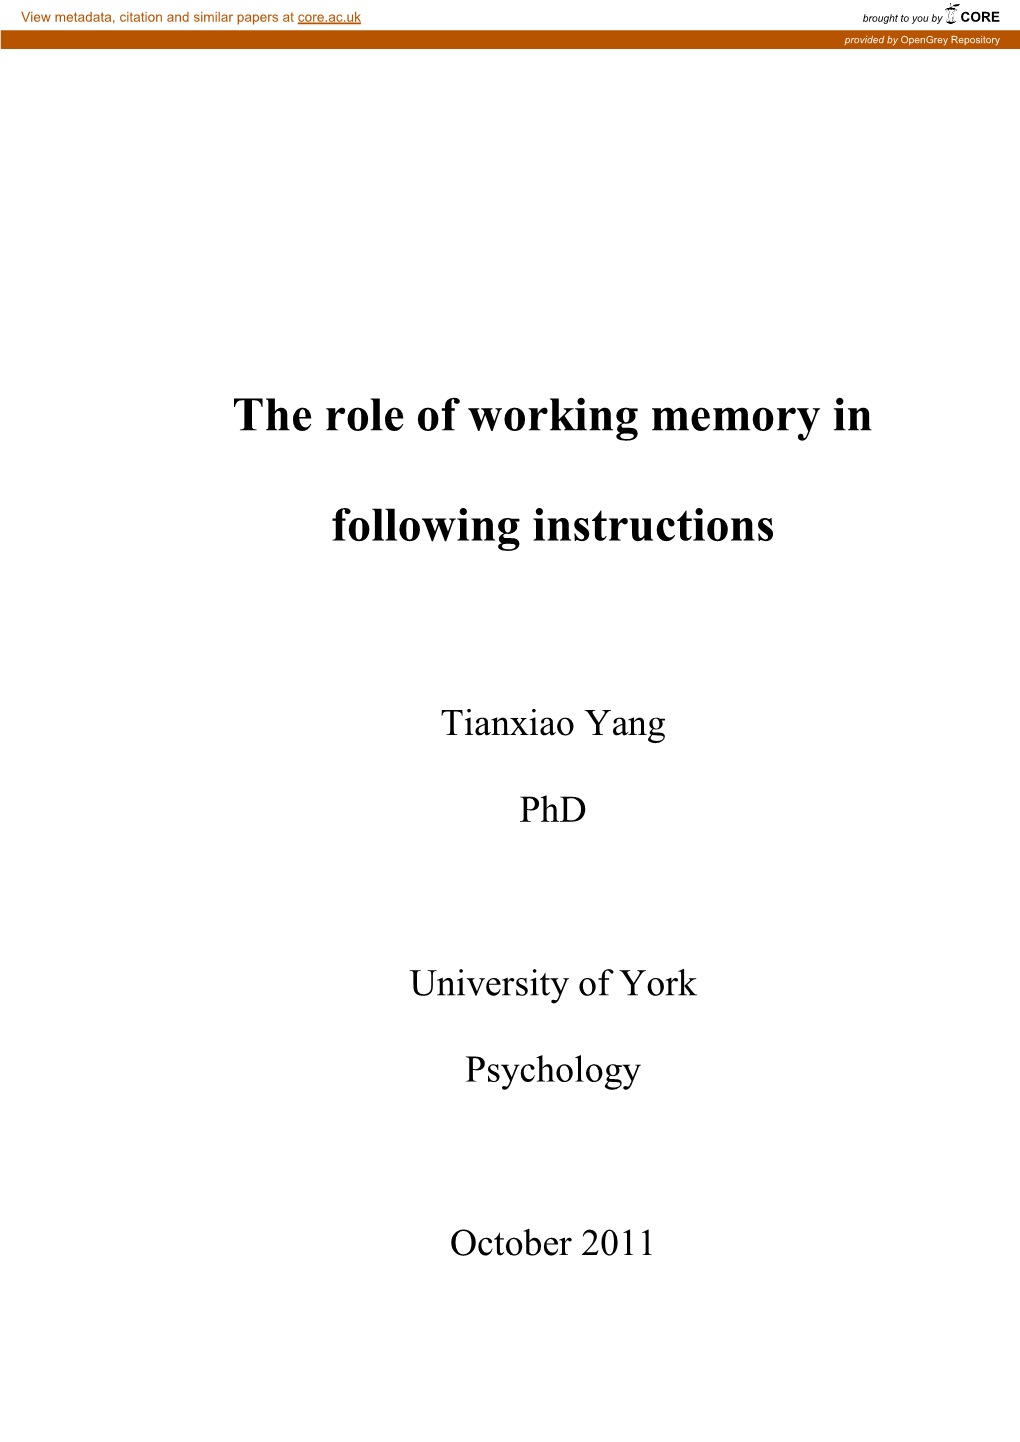 The Role of Working Memory in Following Instructions